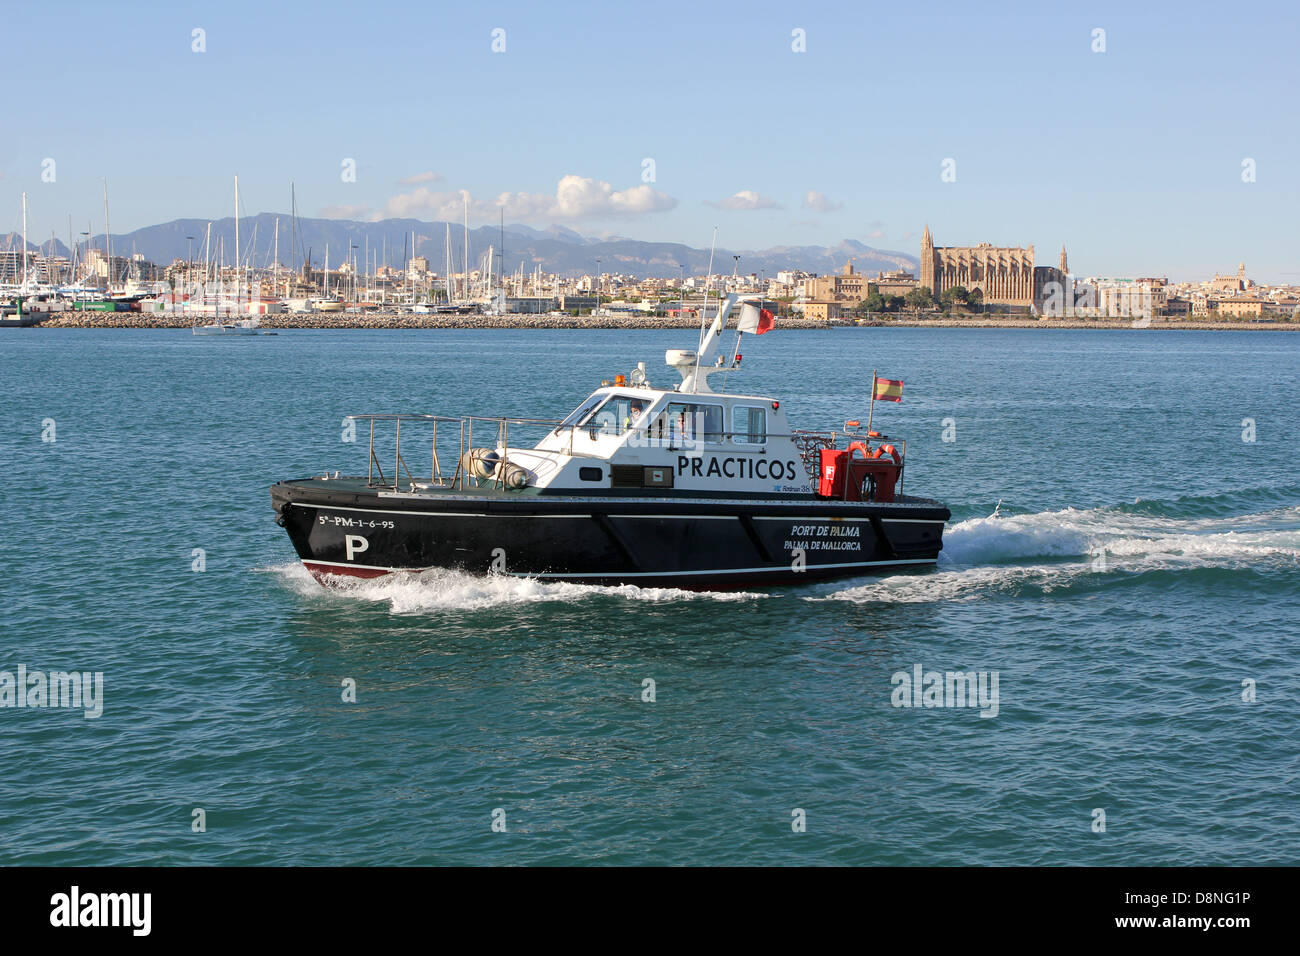 Port Pilot Service (PRACTICOS) launch returning to port past historic Palma Gothic Cathedral - of in the Port of Palma Stock Photo